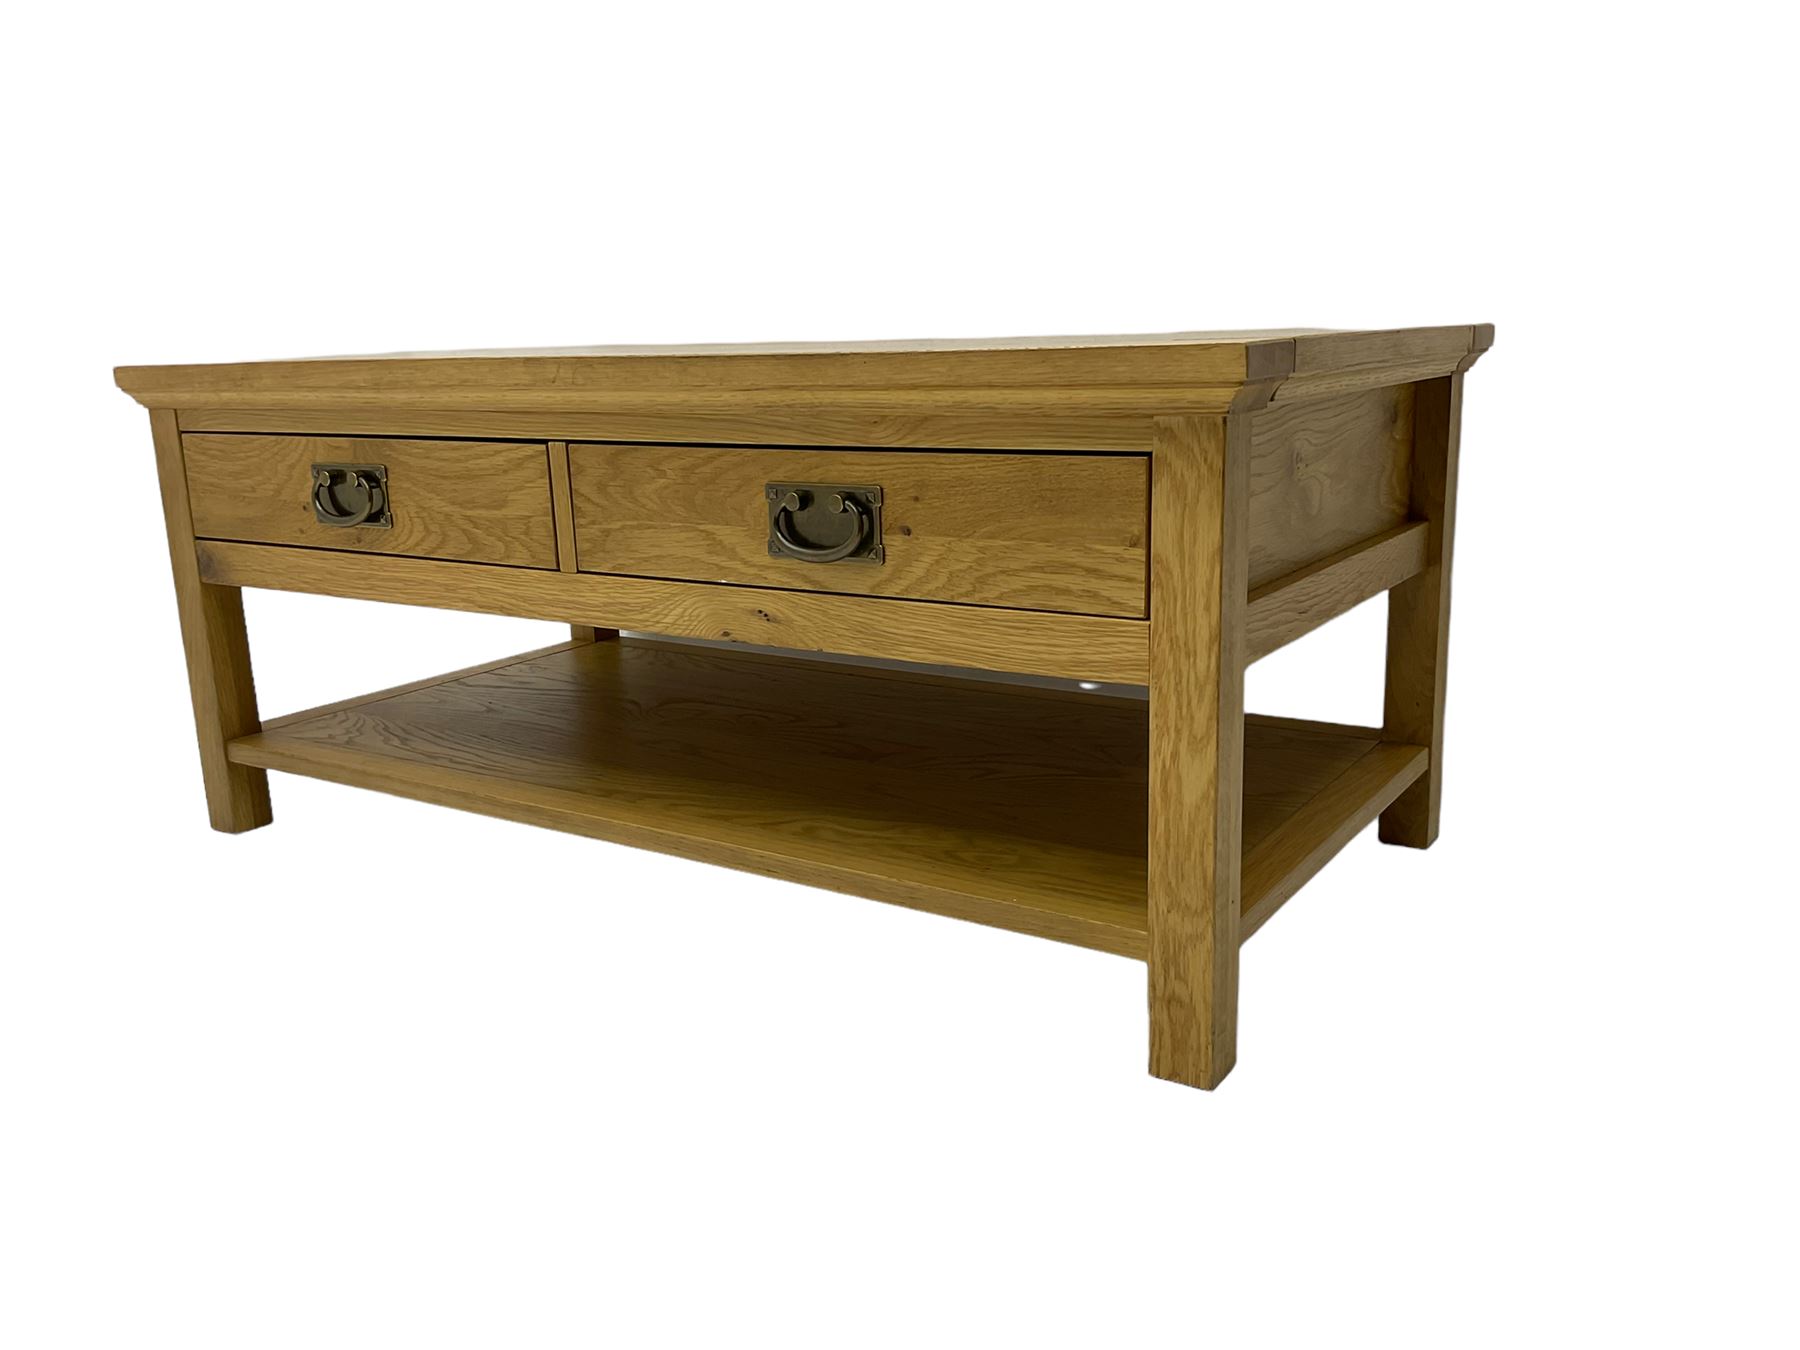 Light oak coffee table fitted with two drawers and undertier - Image 3 of 7